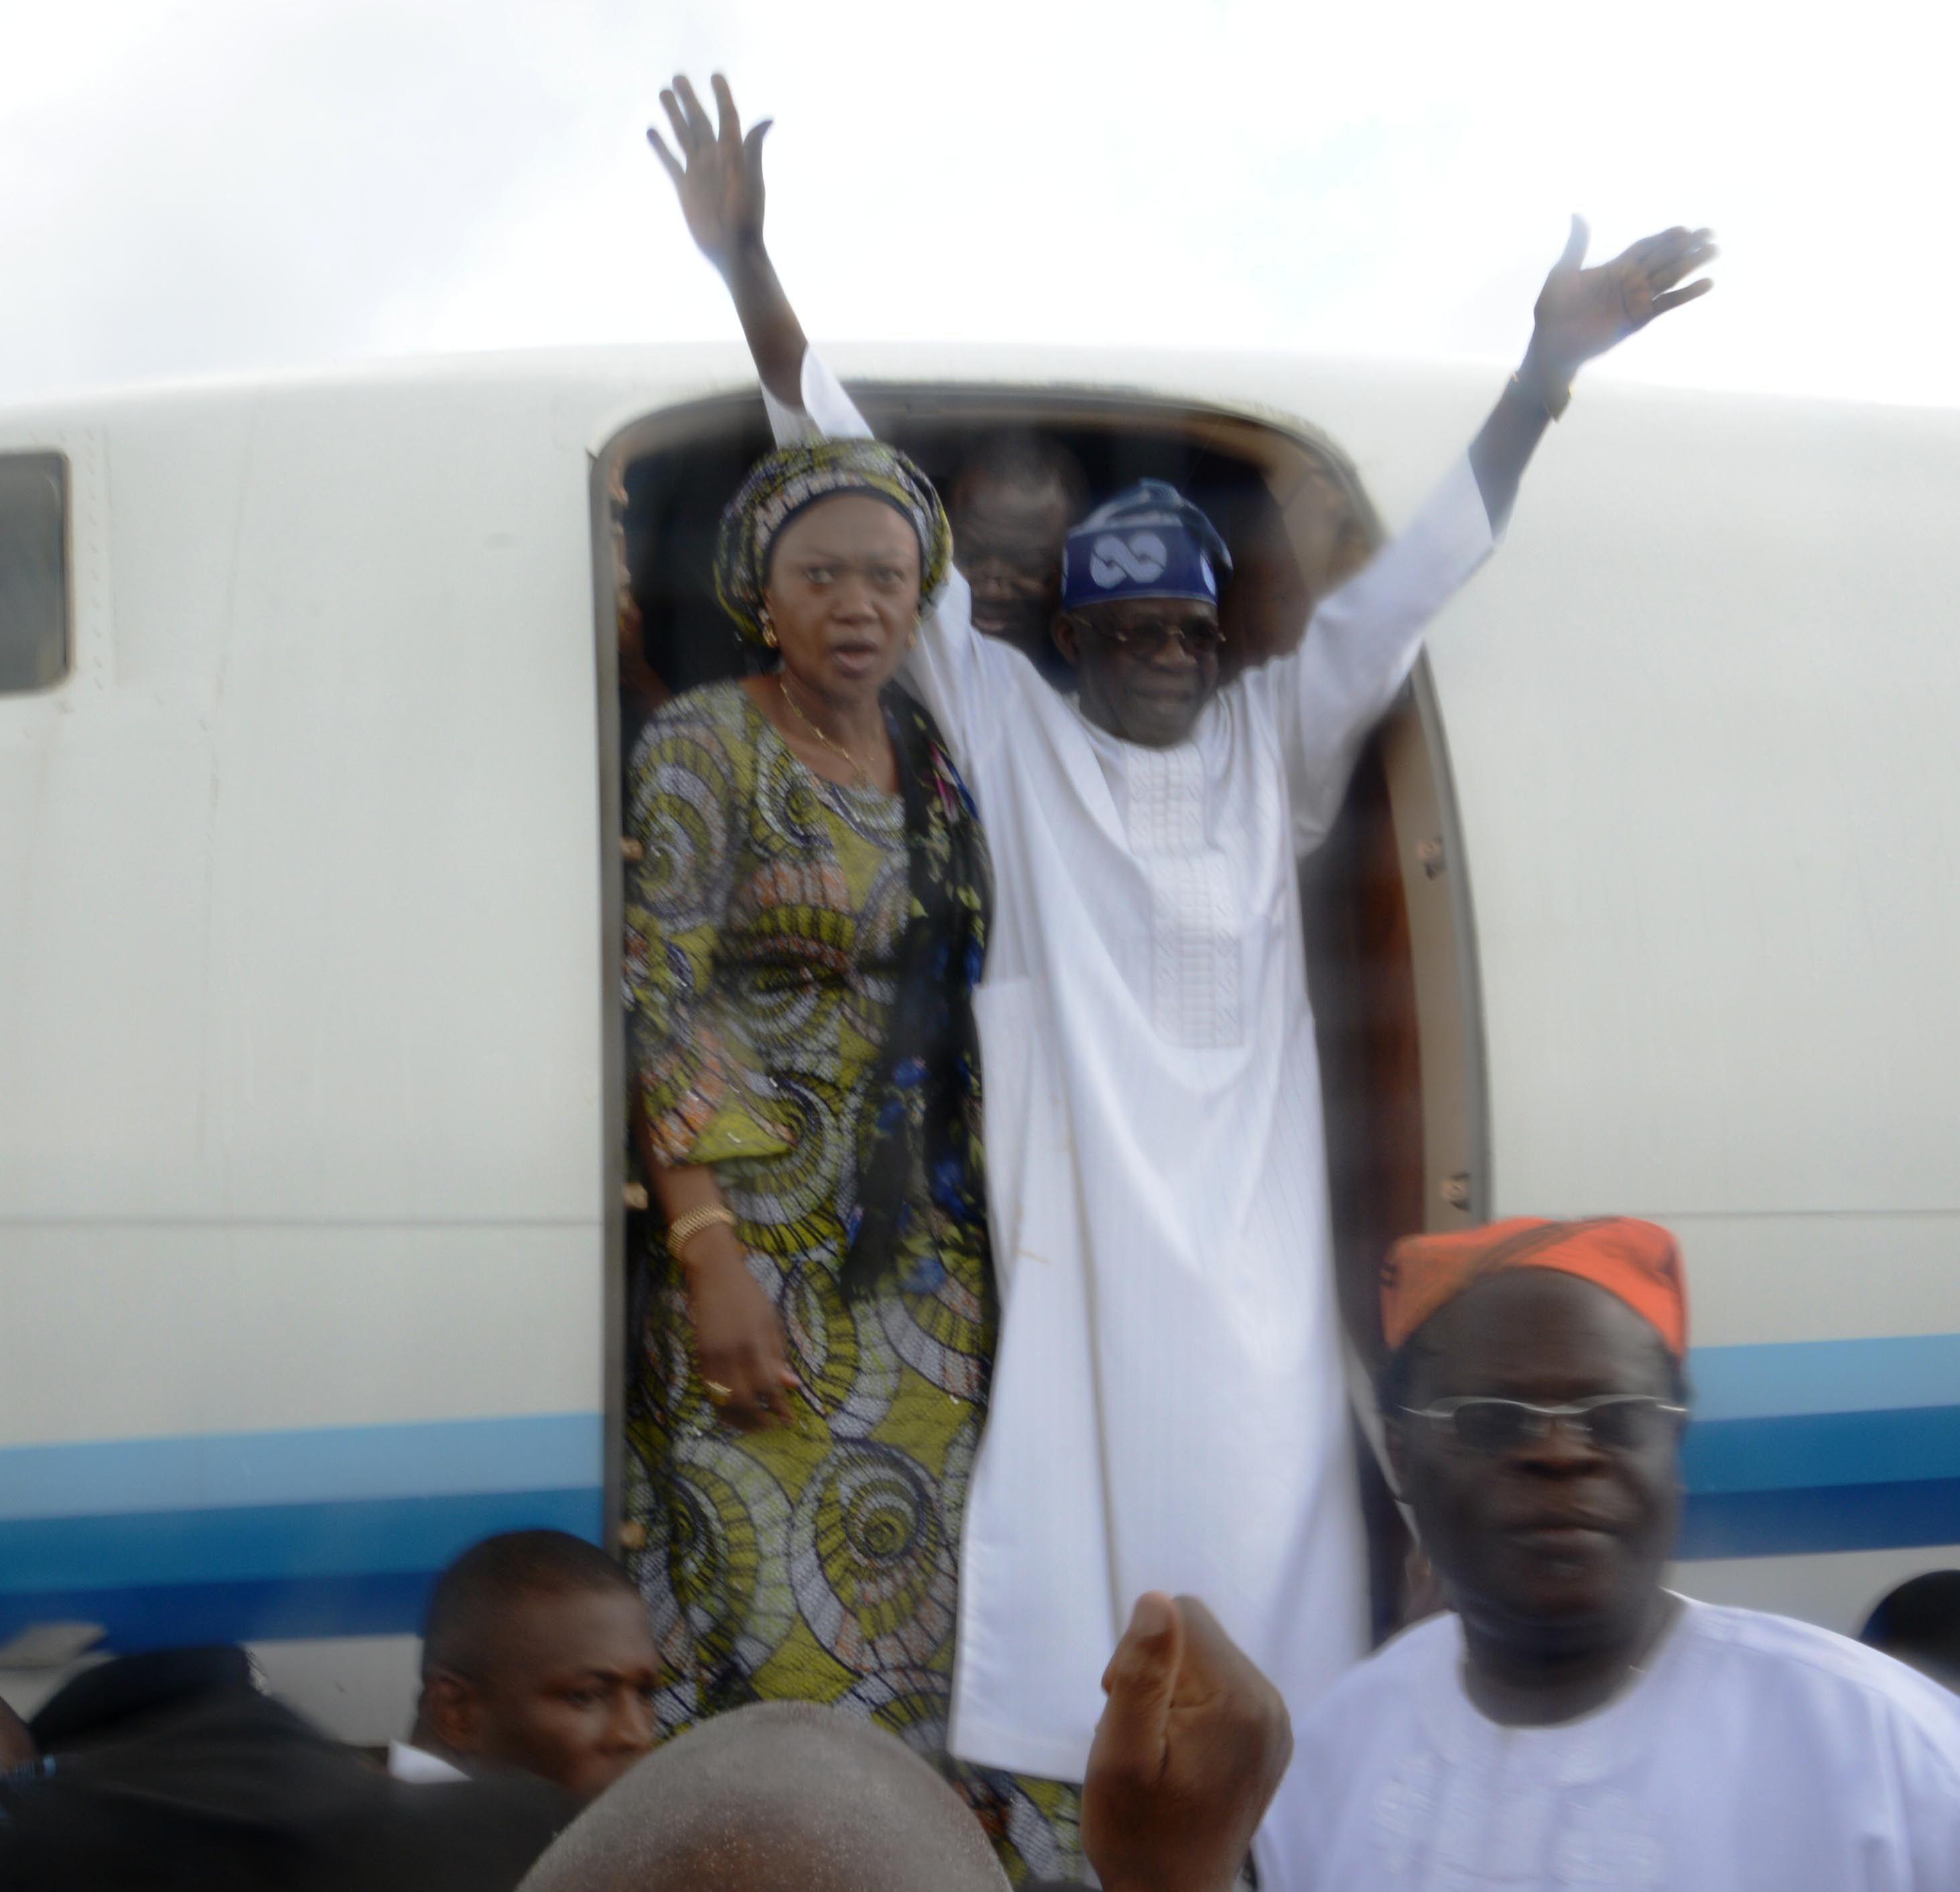 Asiwaju-Bola-Tinubu-and-wife-on-arrival-in-Lagos-from-overseas-medical-treatment